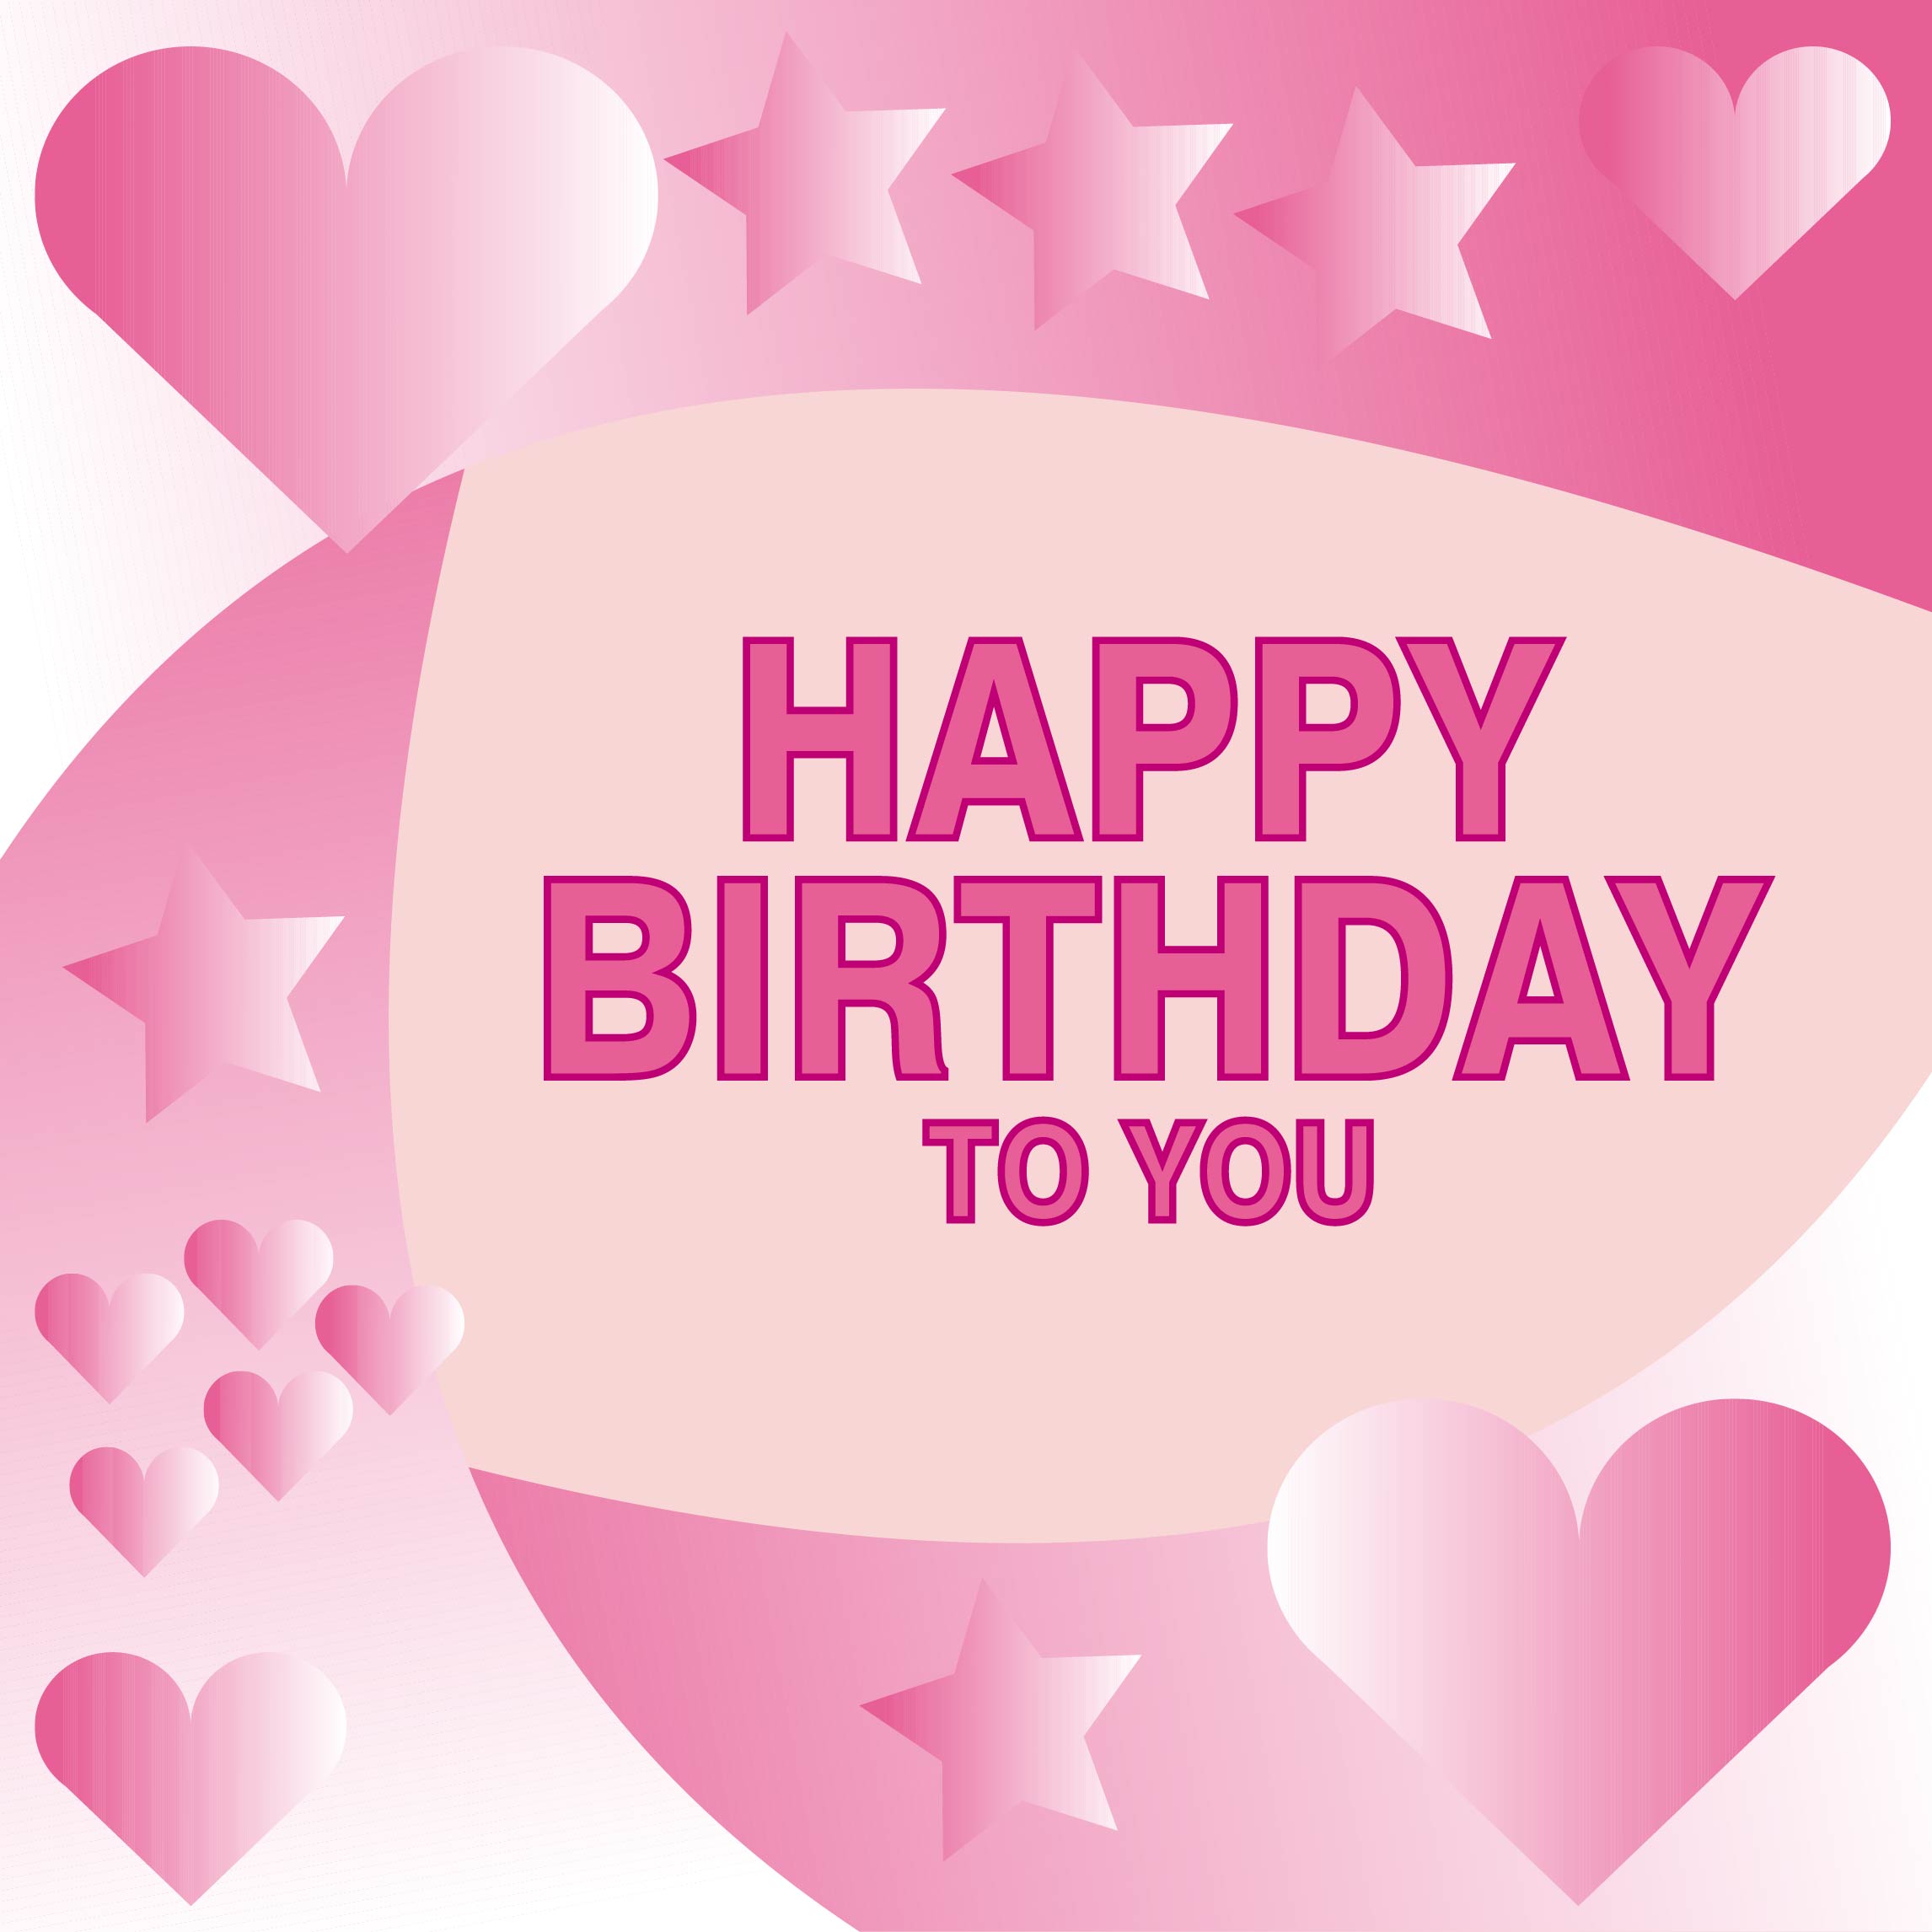 Happy Birthday Card with hearts, stars, and lovely color HD Pictures in JPG, AI and EPS formats preview image.